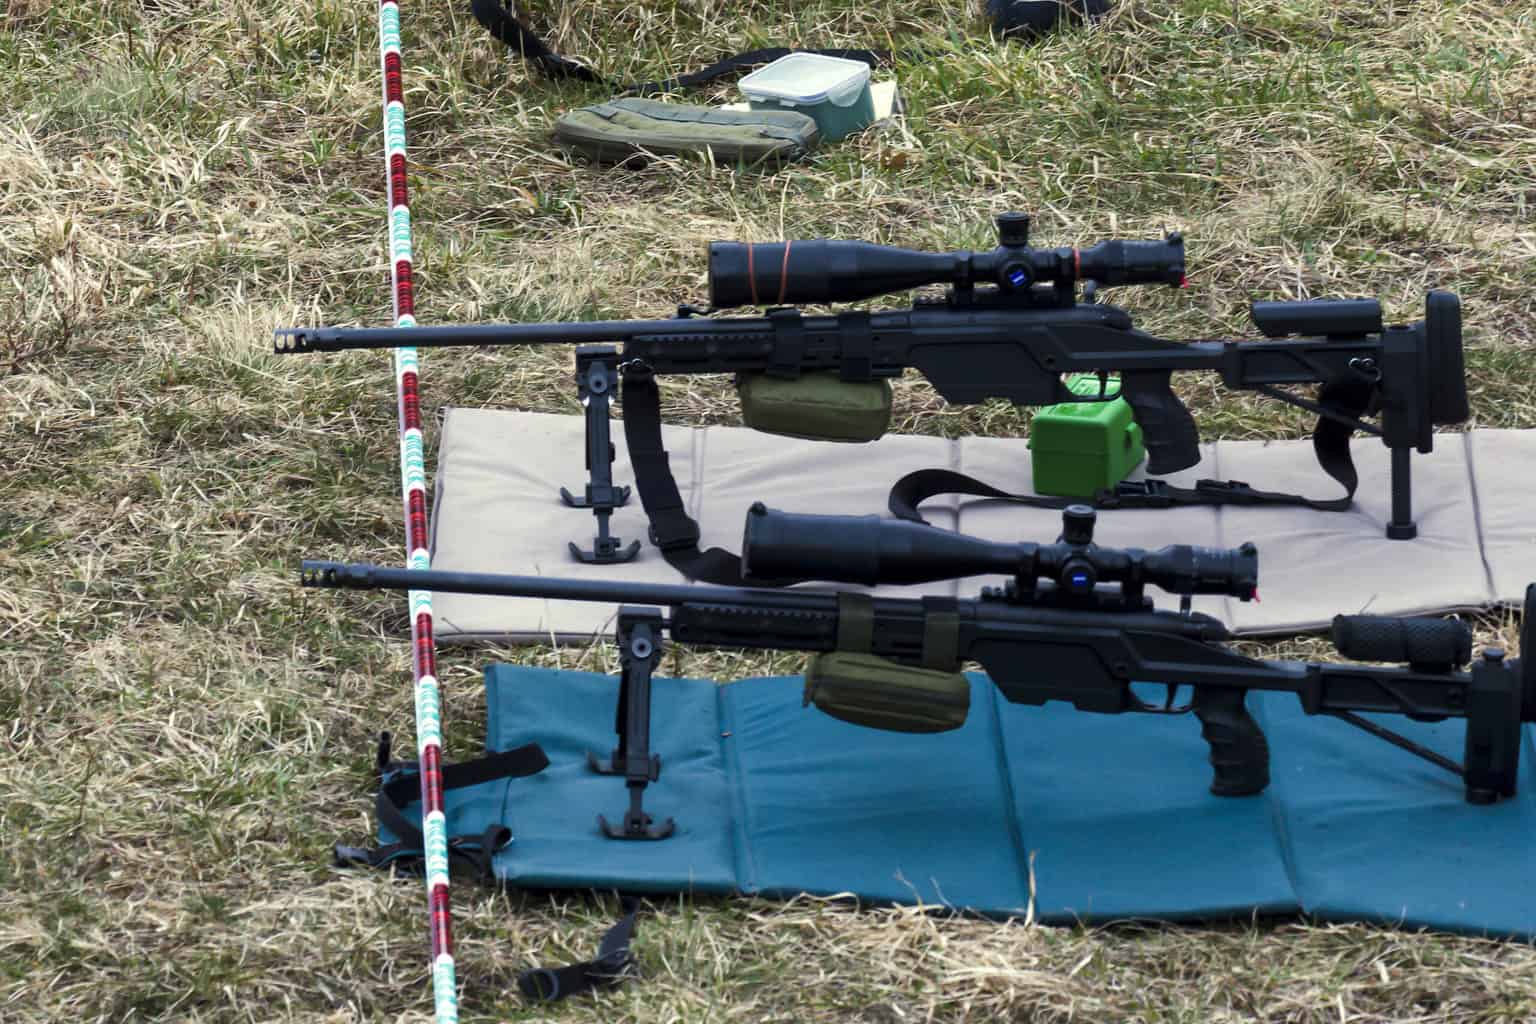 Military rifles aims at a target while being cushioned by a shooting mat on the ground